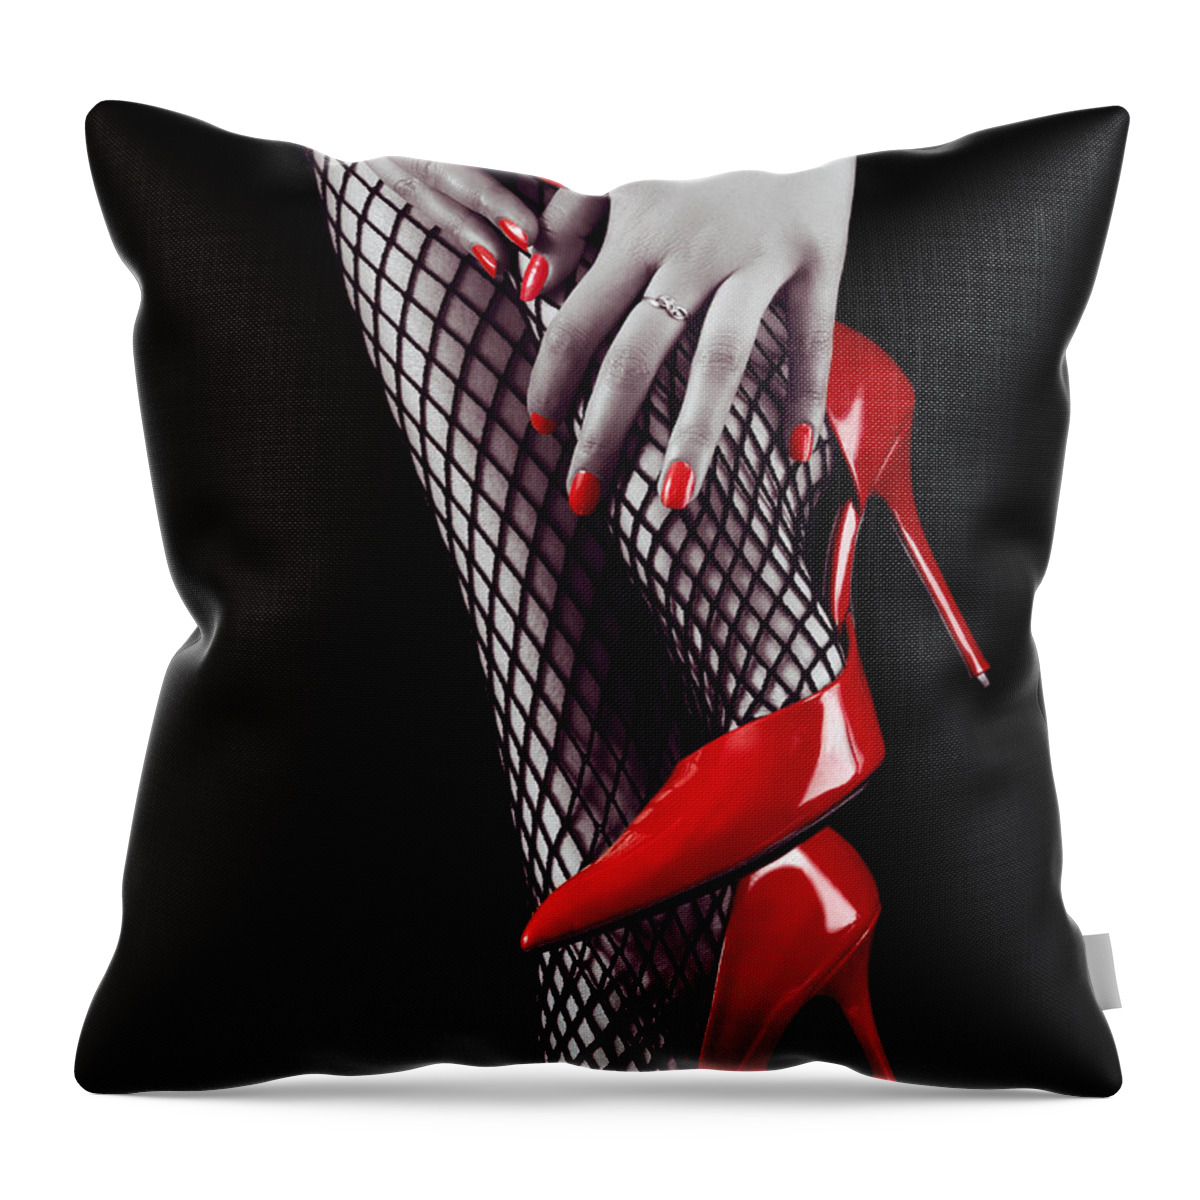 Shoes Throw Pillow featuring the photograph Woman legs in sexy red high heels and stockings by Maxim Images Exquisite Prints